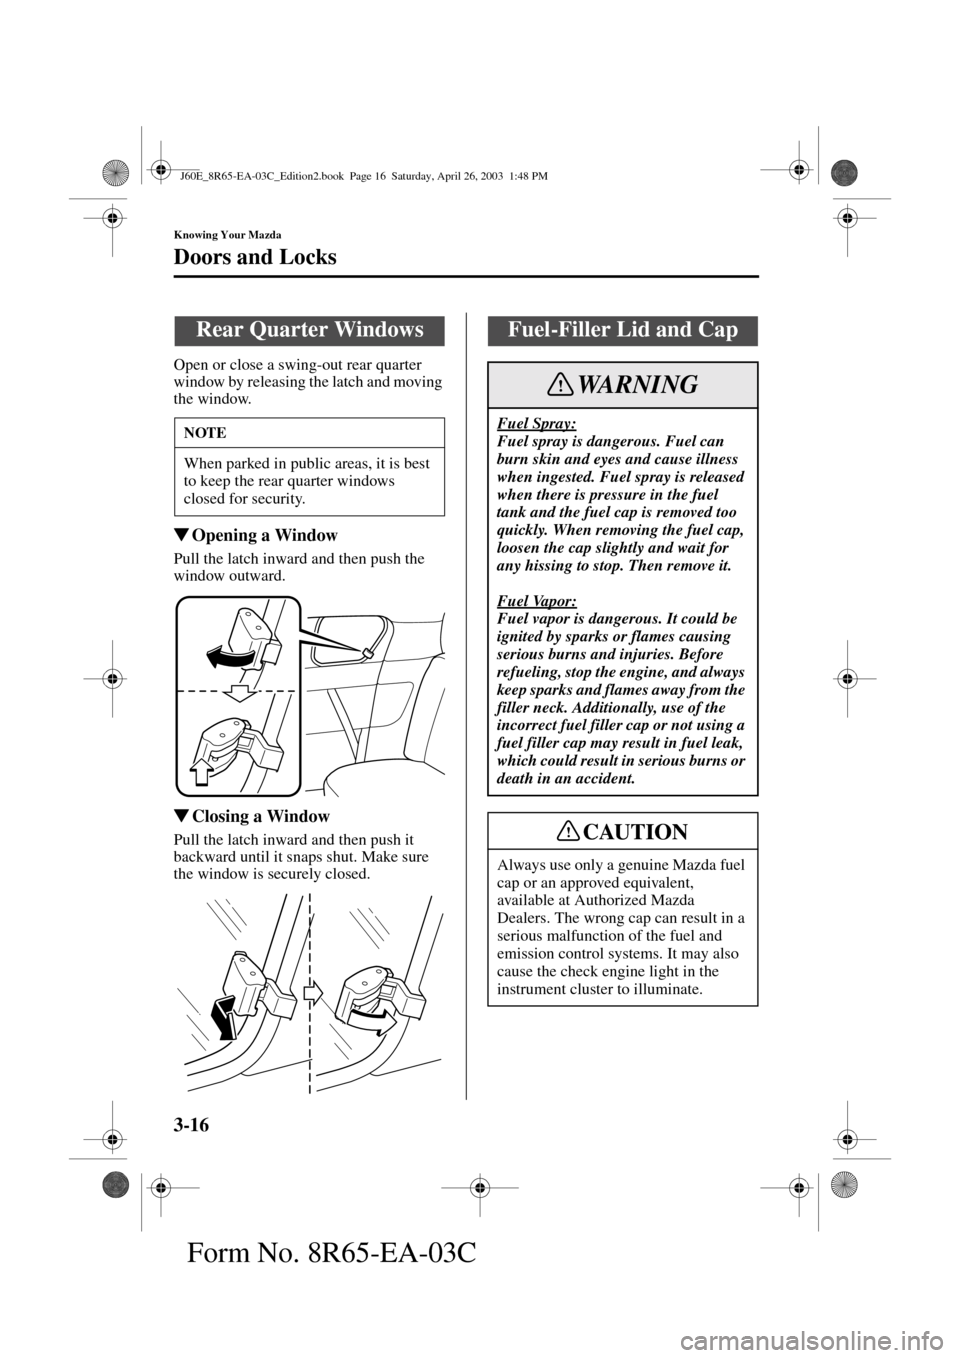 MAZDA MODEL RX 8 2004  Owners Manual (in English) 3-16
Knowing Your Mazda
Doors and Locks
Form No. 8R65-EA-03C
Open or close a swing-out rear quarter 
window by releasing the latch and moving 
the window.
Opening a Window
Pull the latch inward and t